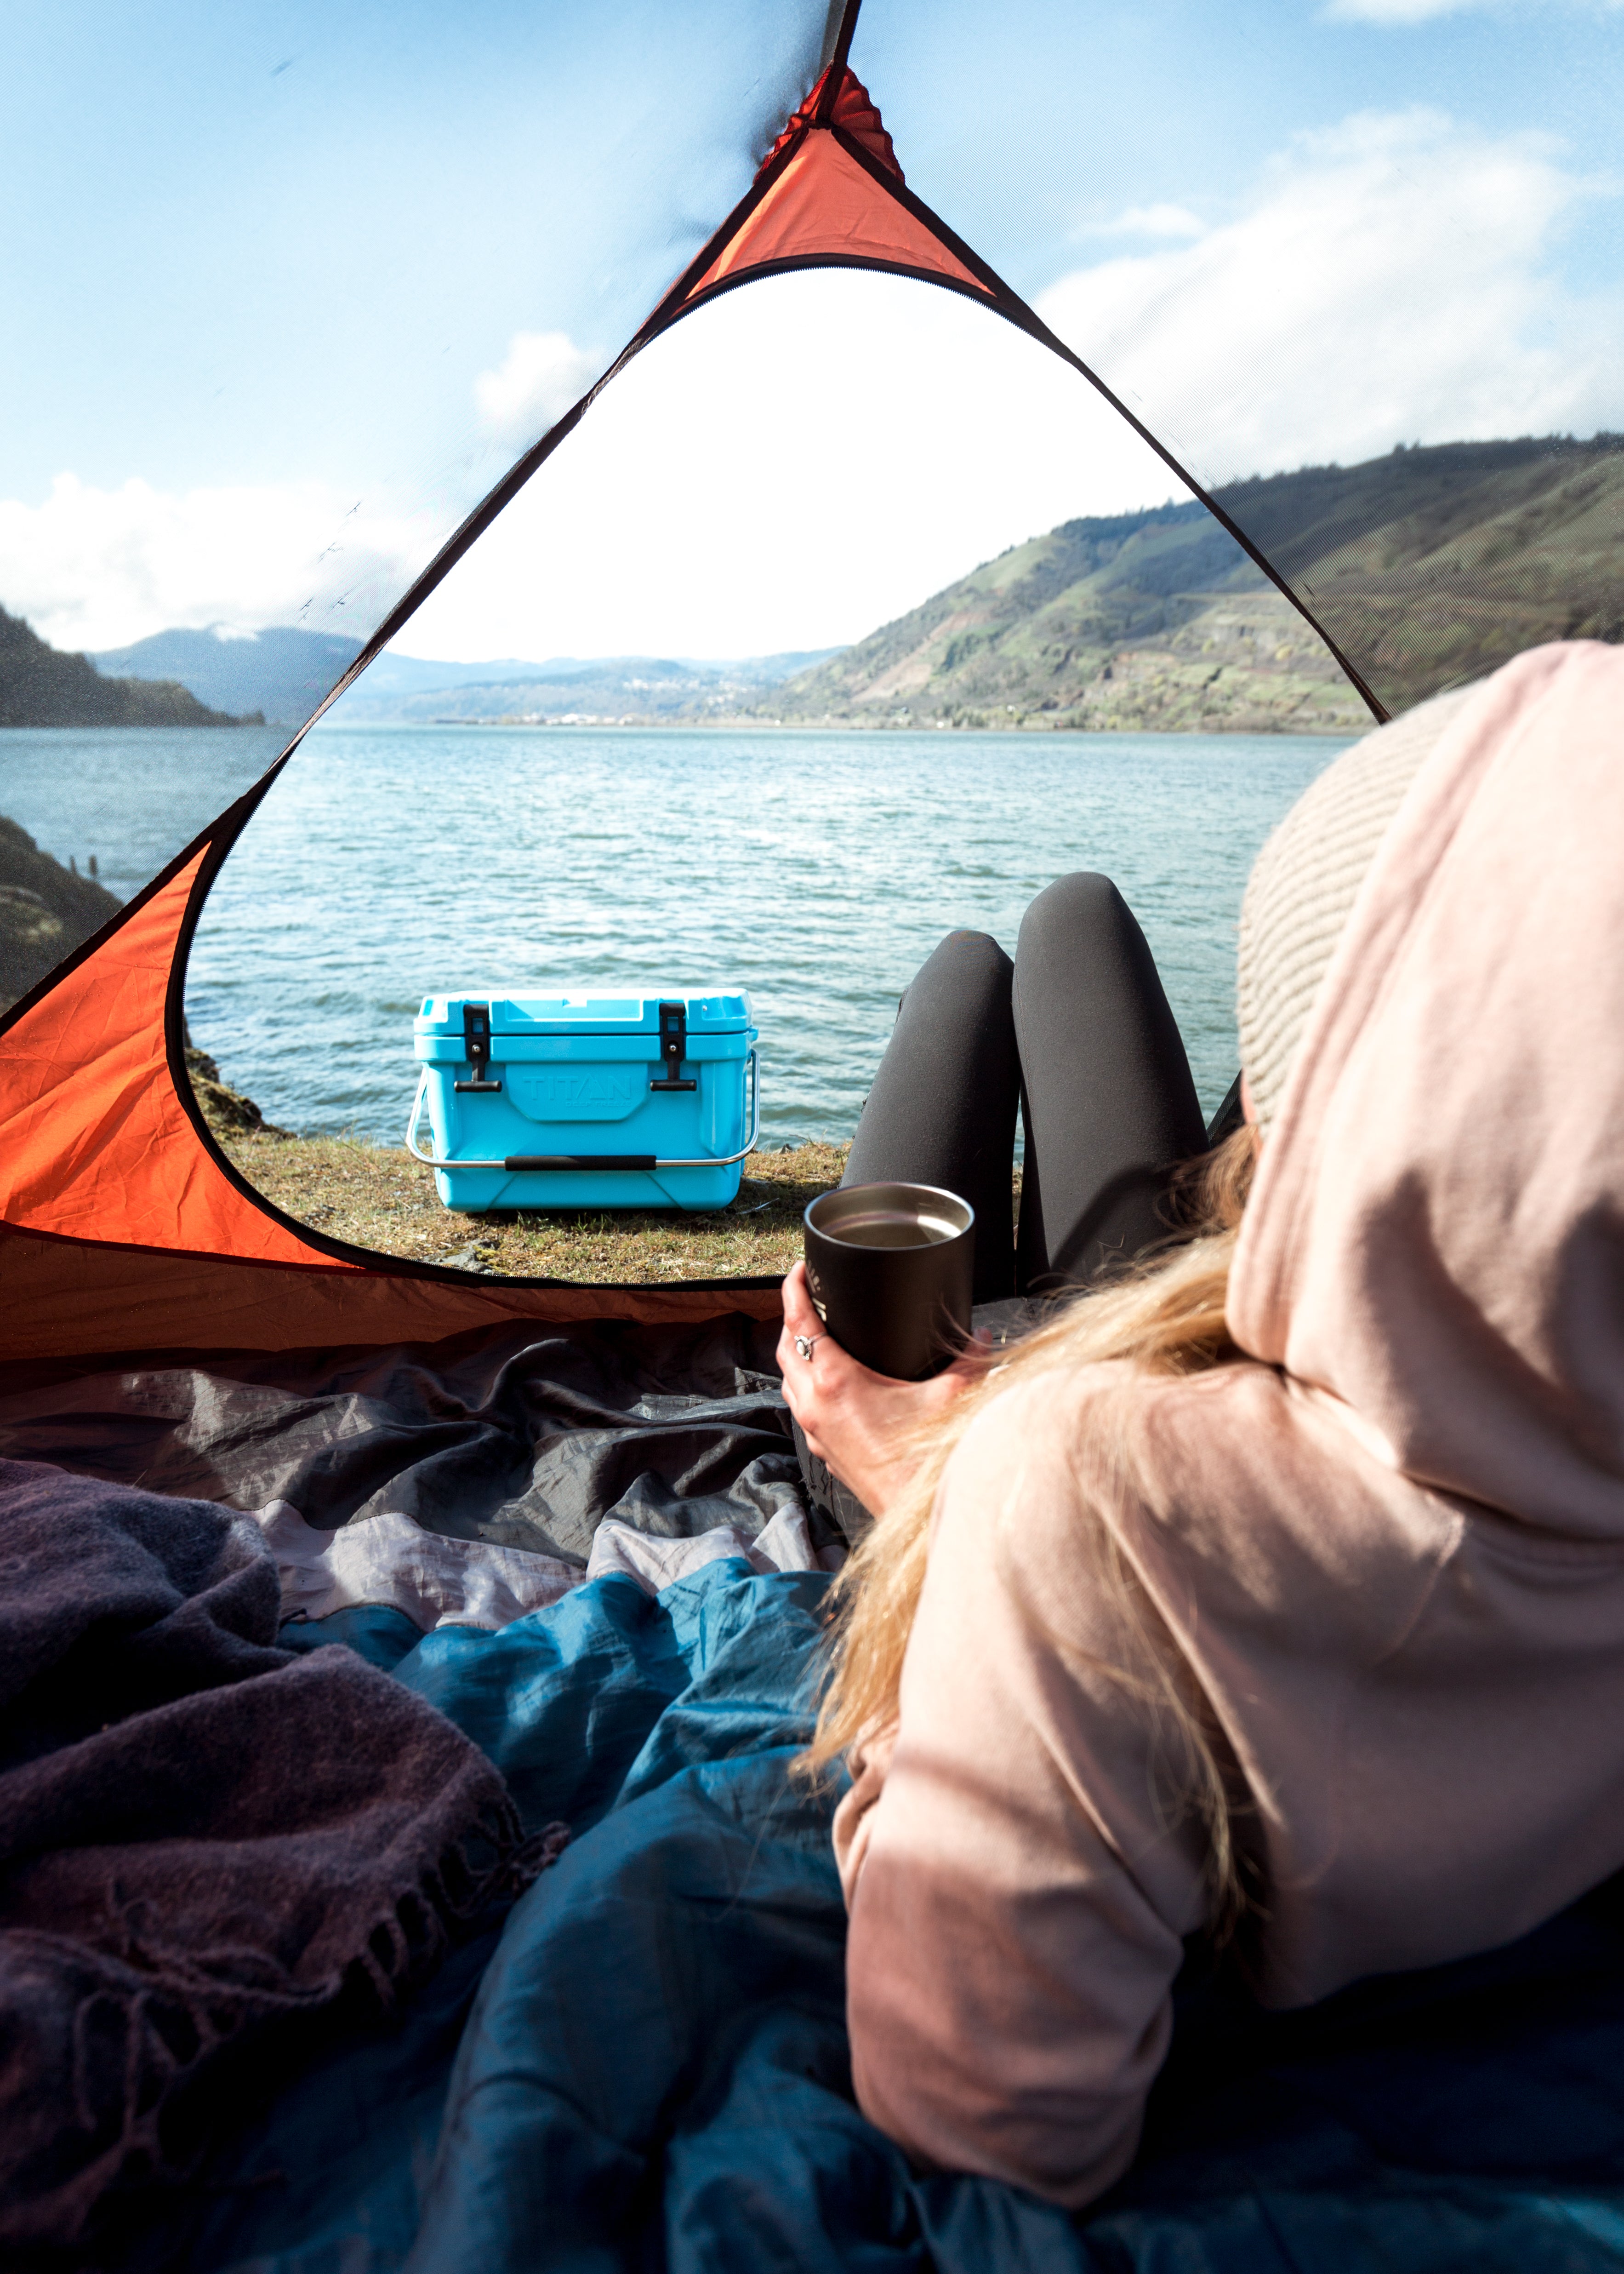 Camping with Arctic Zone - carrying the cooler past the tent - chilling in the tent with a drink overlooking a lake - Best coolers for camping 